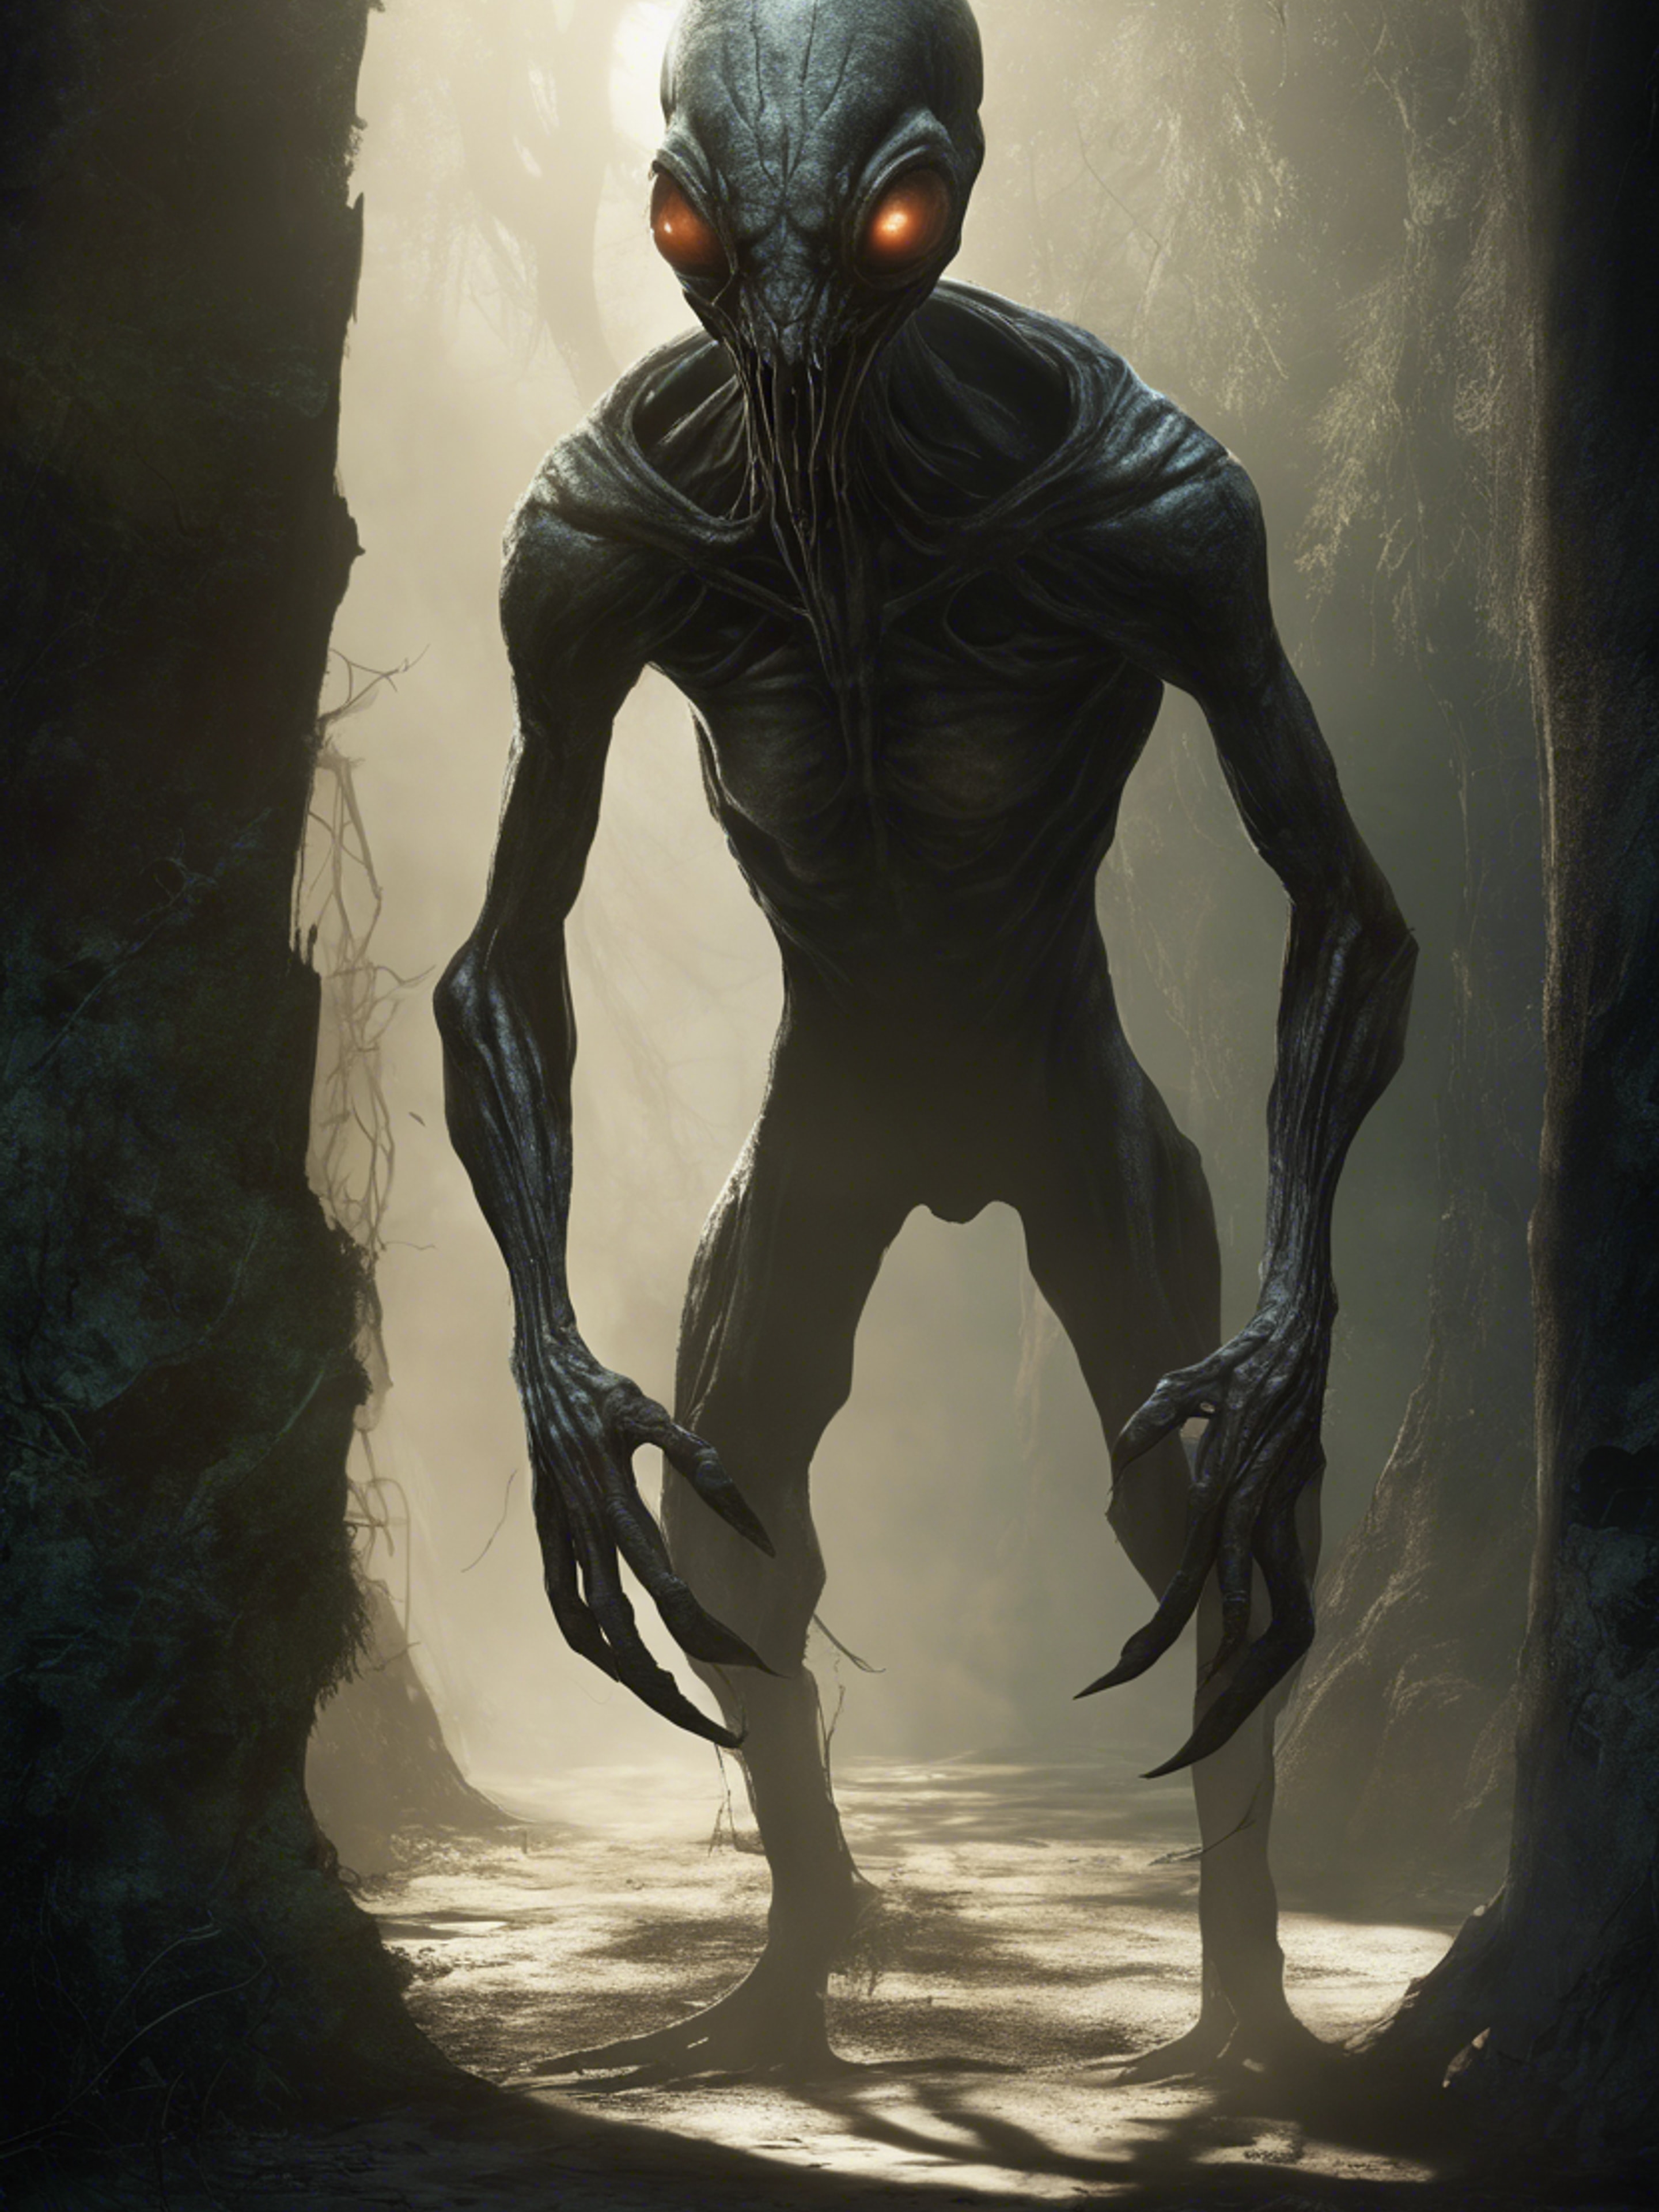 An eerie shot of an alien creature from a sci-fi horror game, emerging from the shadows. Тапет[70e4d6a77d4241508cba]